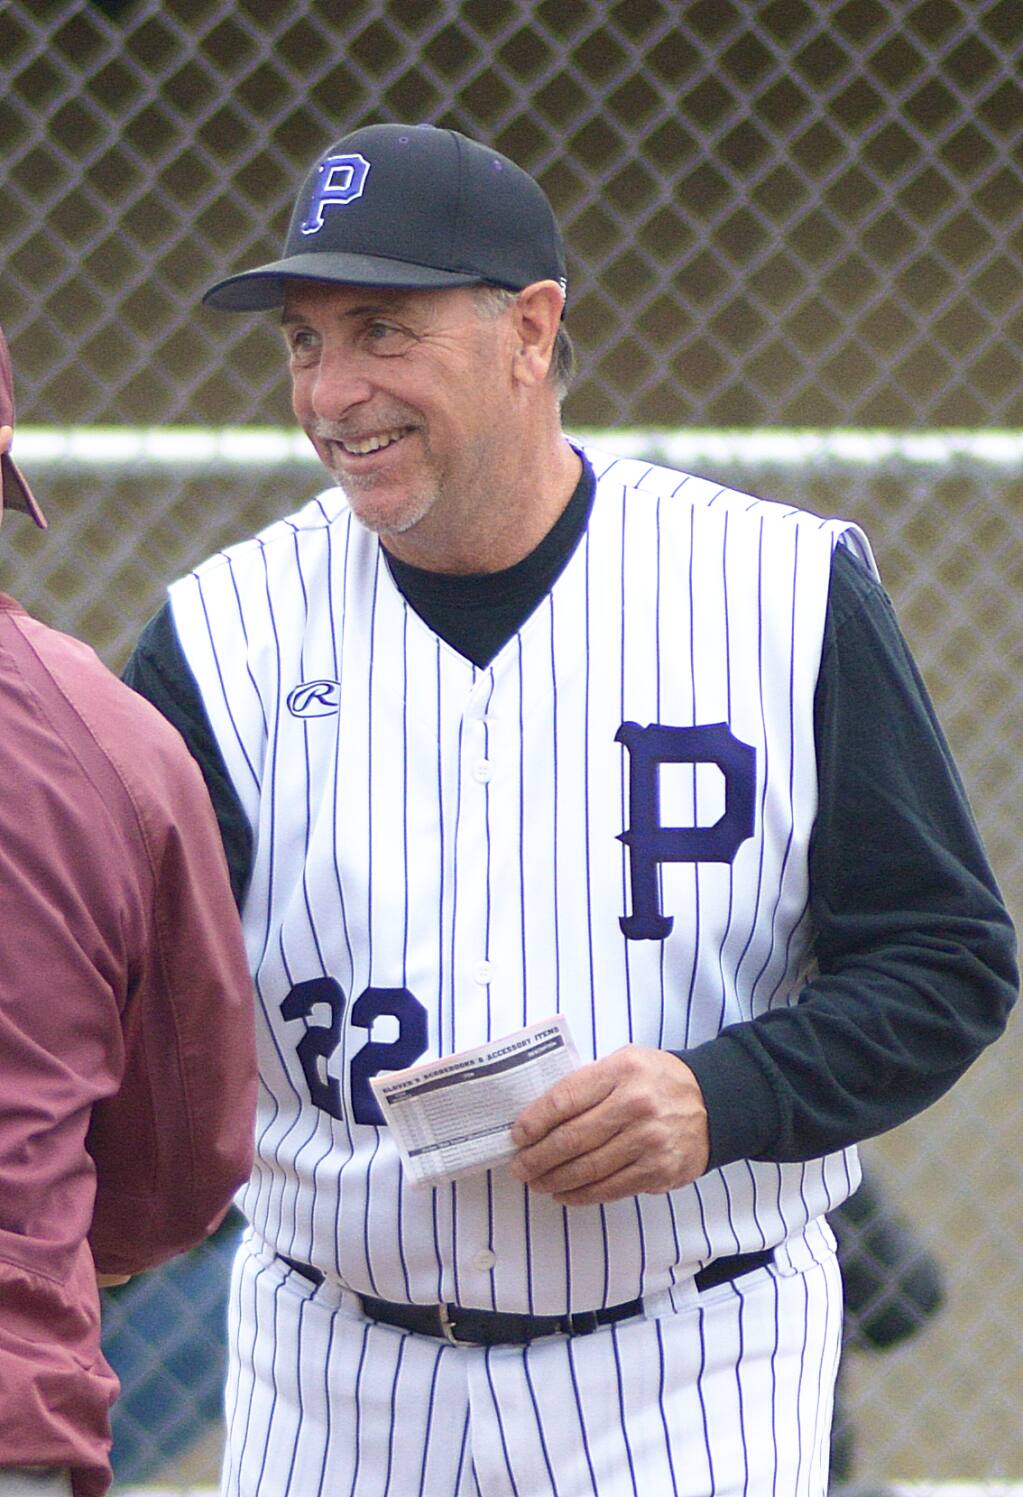 Former Petaluma High coach Jim Selvitella is changing hats and uniforms to become baseball coach at St. Vincent High School. (SUMNER FOWLER / FOR THE ARGUS-COURIER)